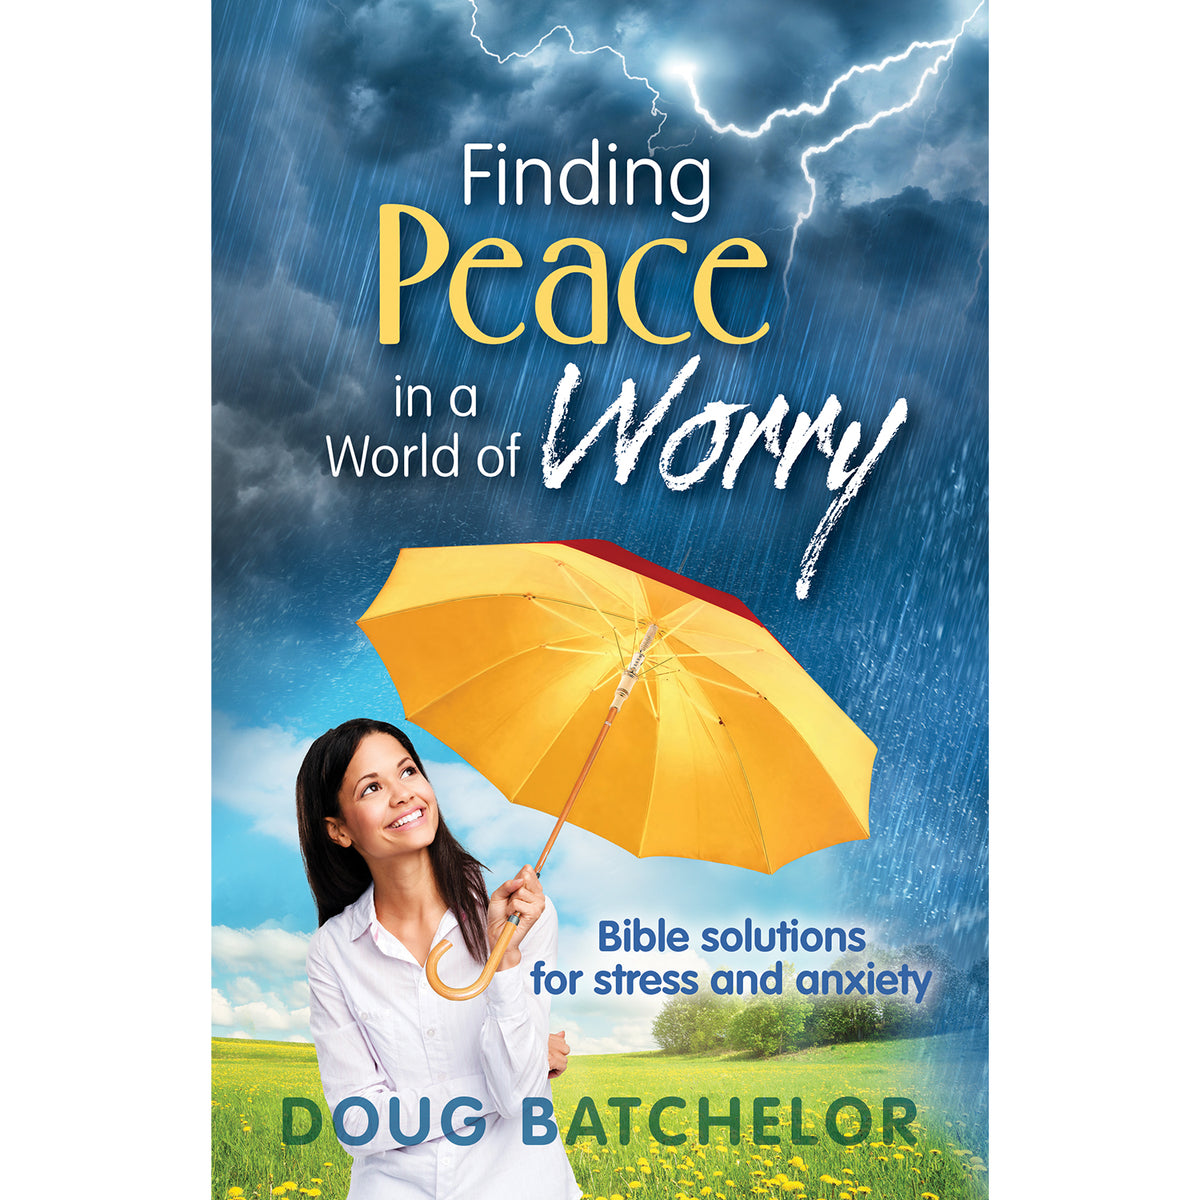 Finding Peace in a World of Worry: Bible Solutions for Stress and Anxiety by Doug Batchelor